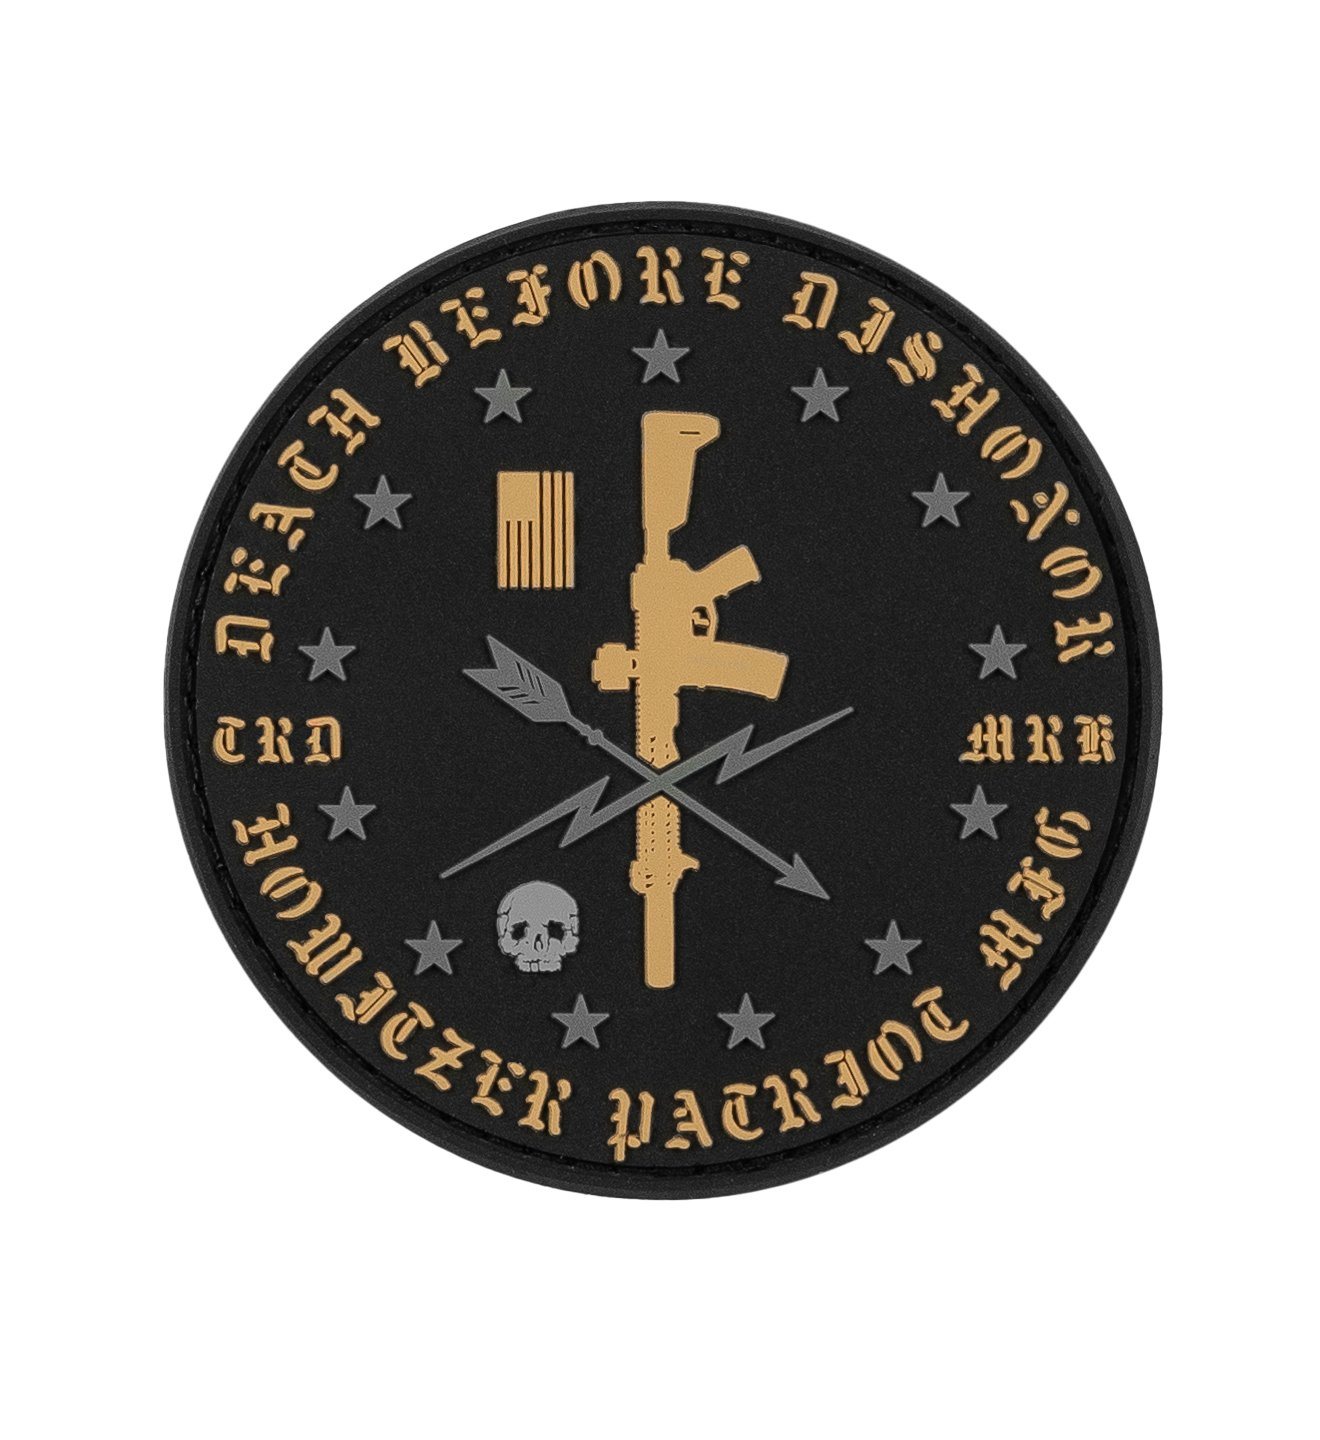 Accessories - Before Morale Patch